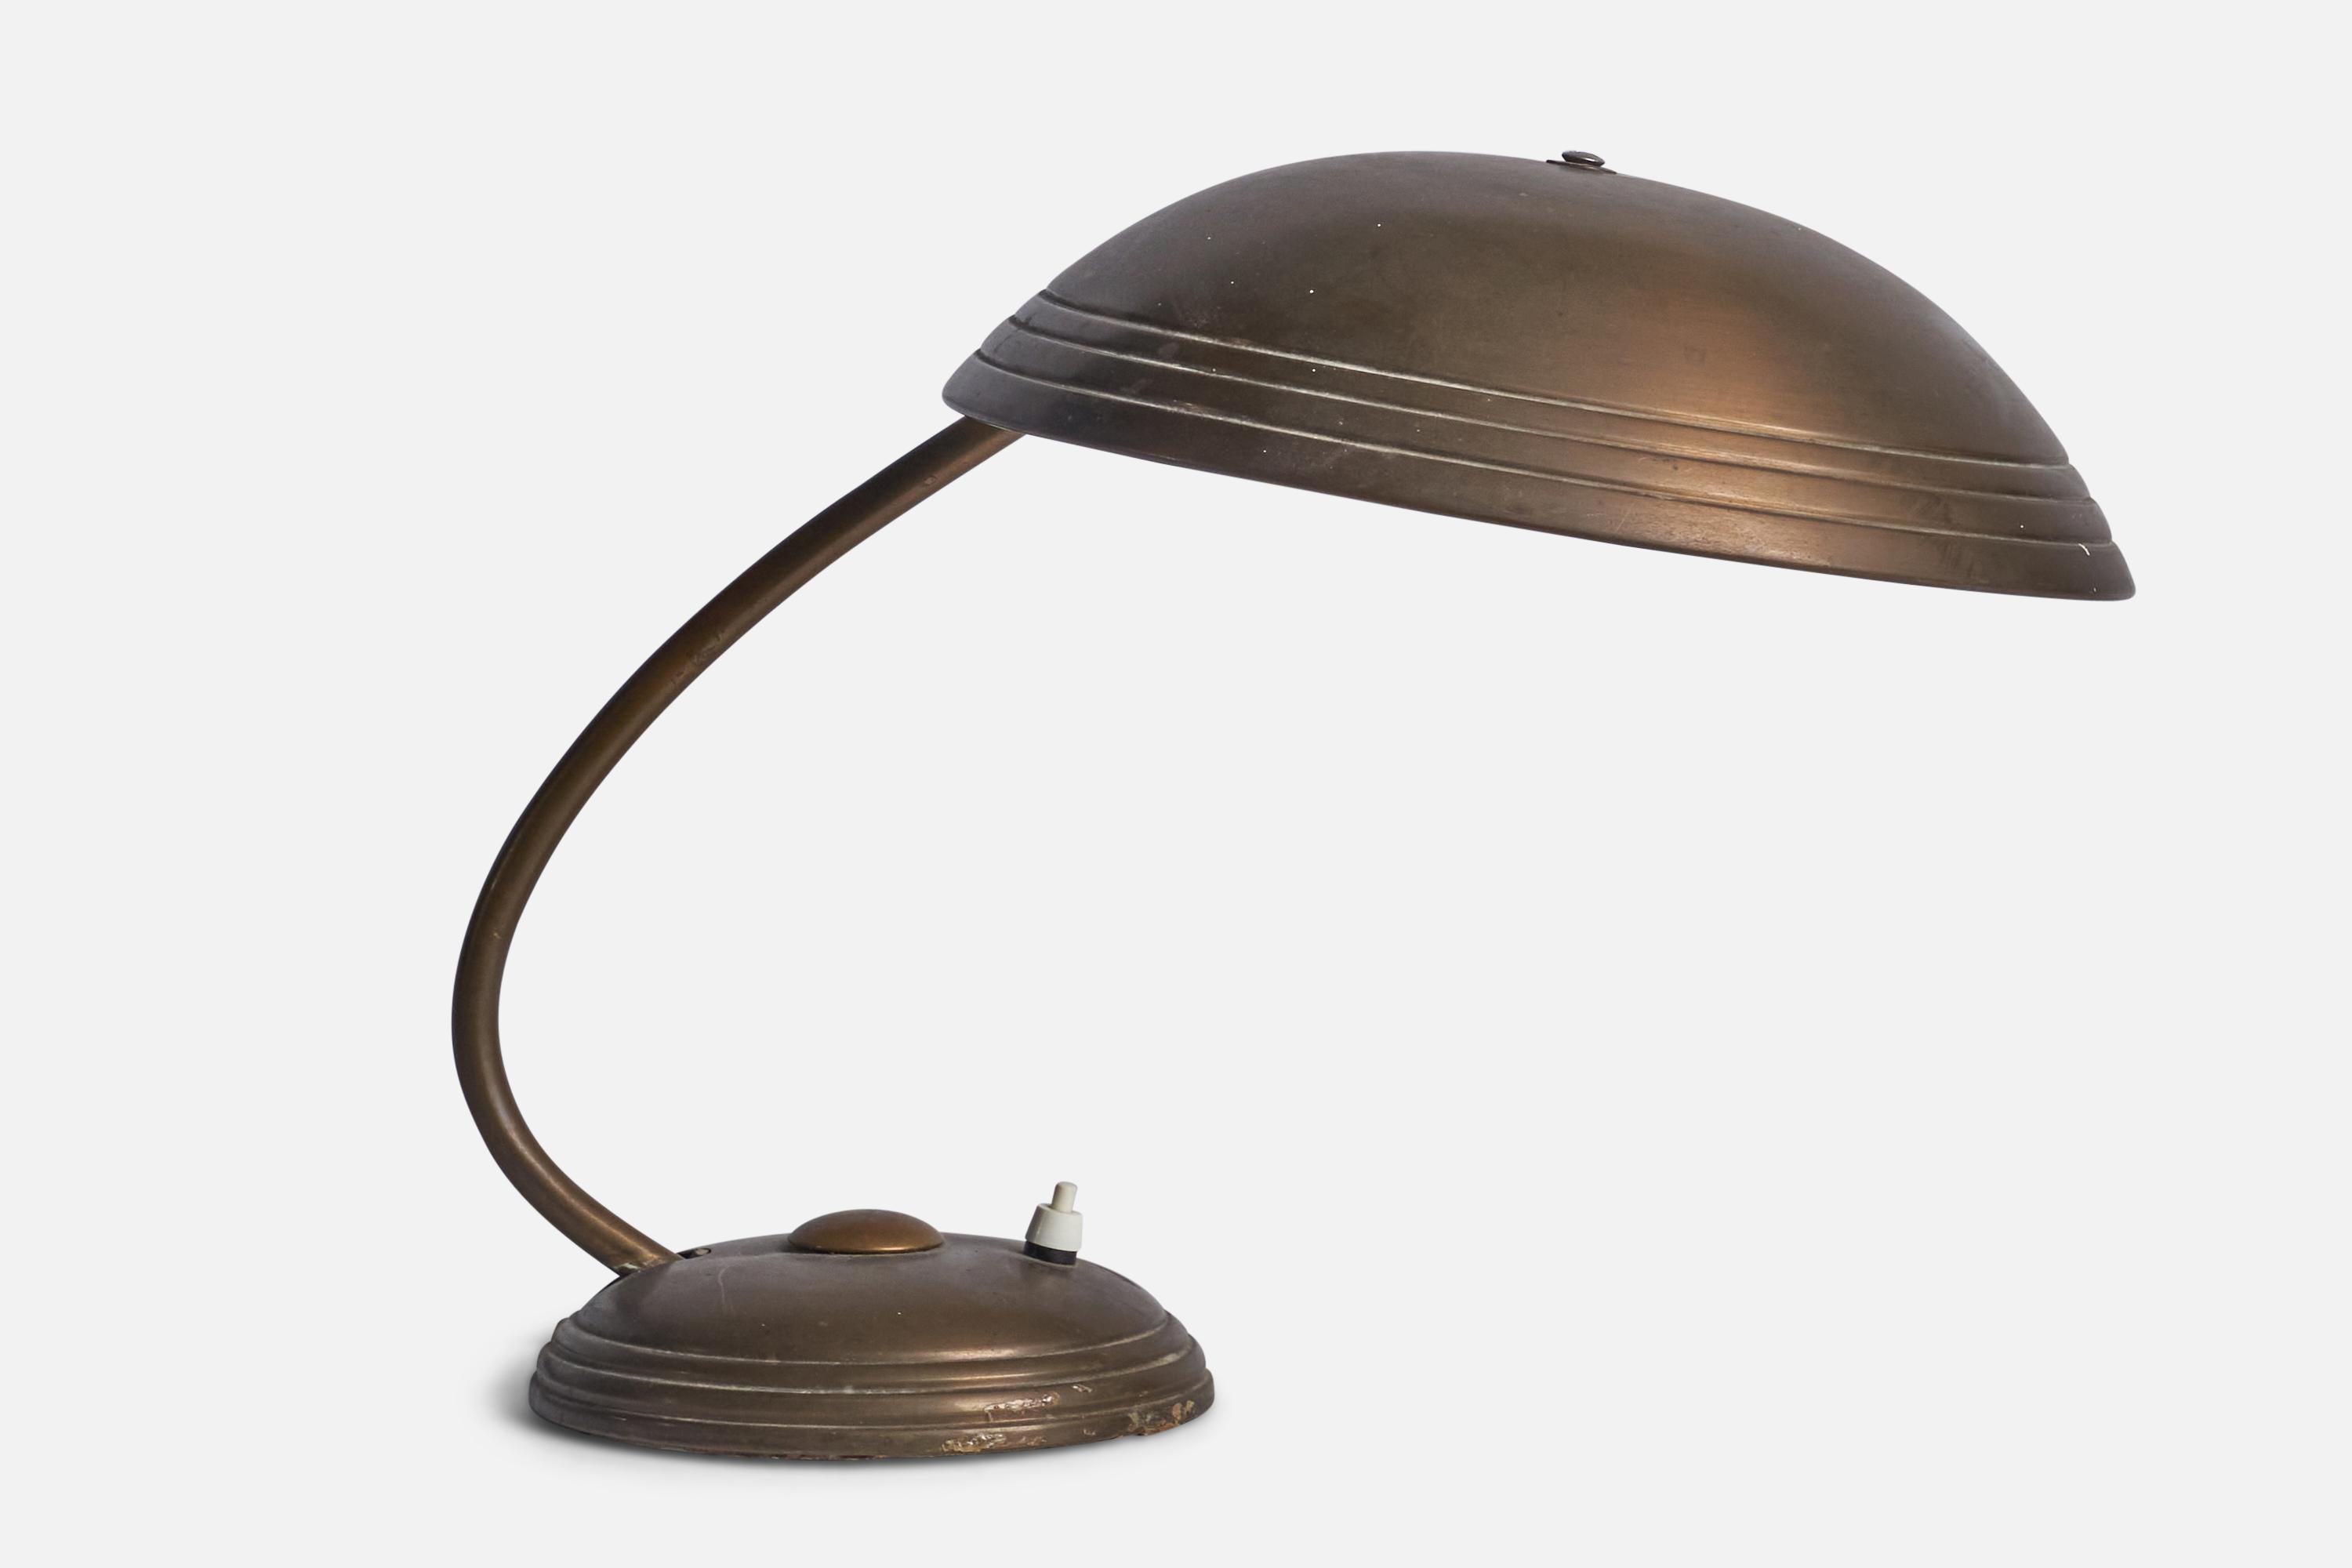 A brass table lamp designed and produced by Helo 
Leuchten, Germany, 1940s.

Overall Dimensions (inches): 12.75” H x 12.25” W x 17” D
Bulb Specifications: E-26 Bulb
Number of Sockets: 1
All lighting will be converted for US usage. We are unable to